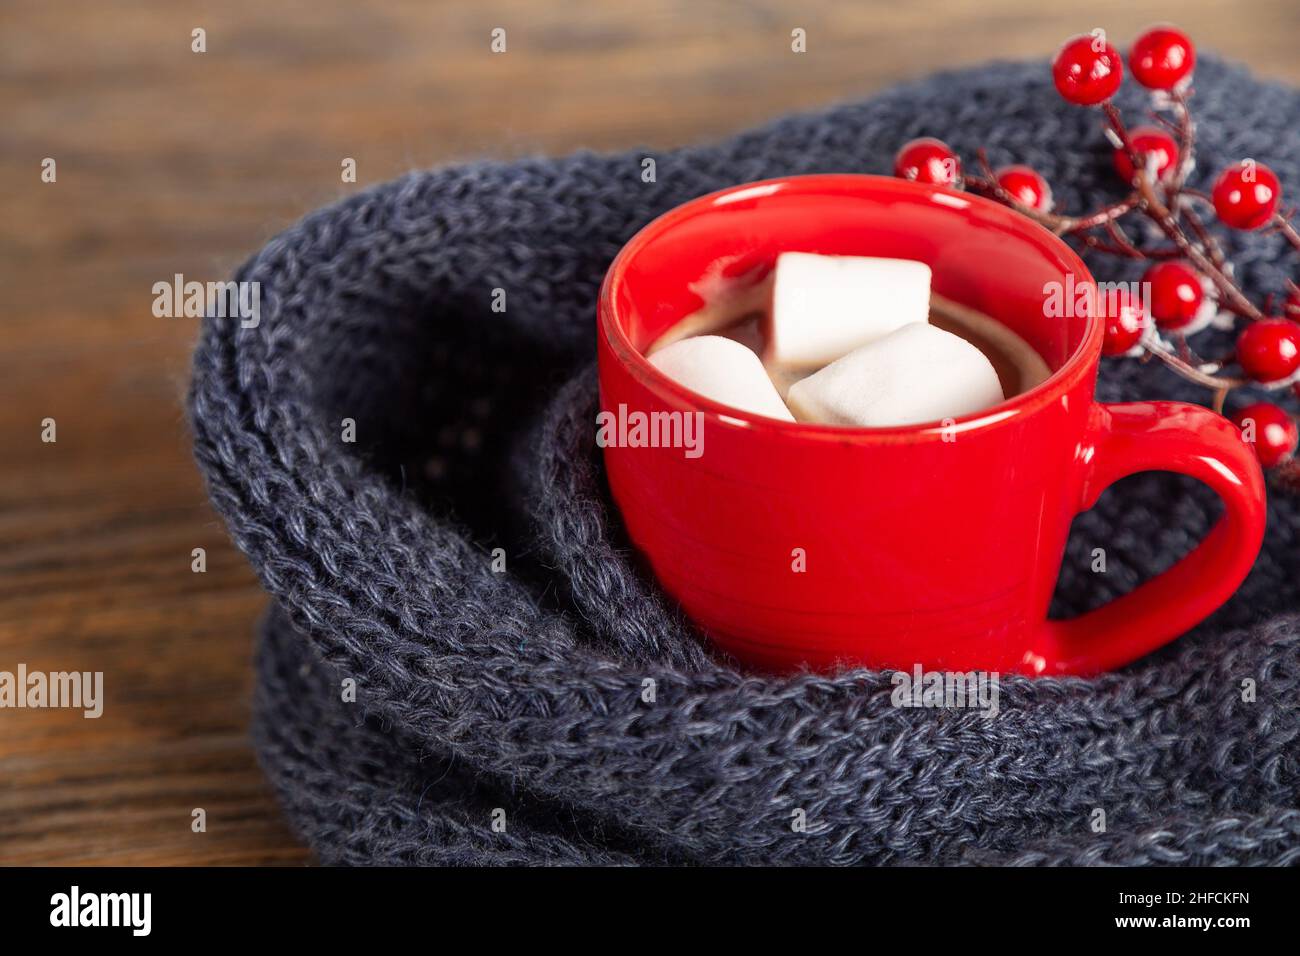 Christmas and winter cozy background with knitted scarf and red mug with cocoa or hot chocolate. Stock Photo